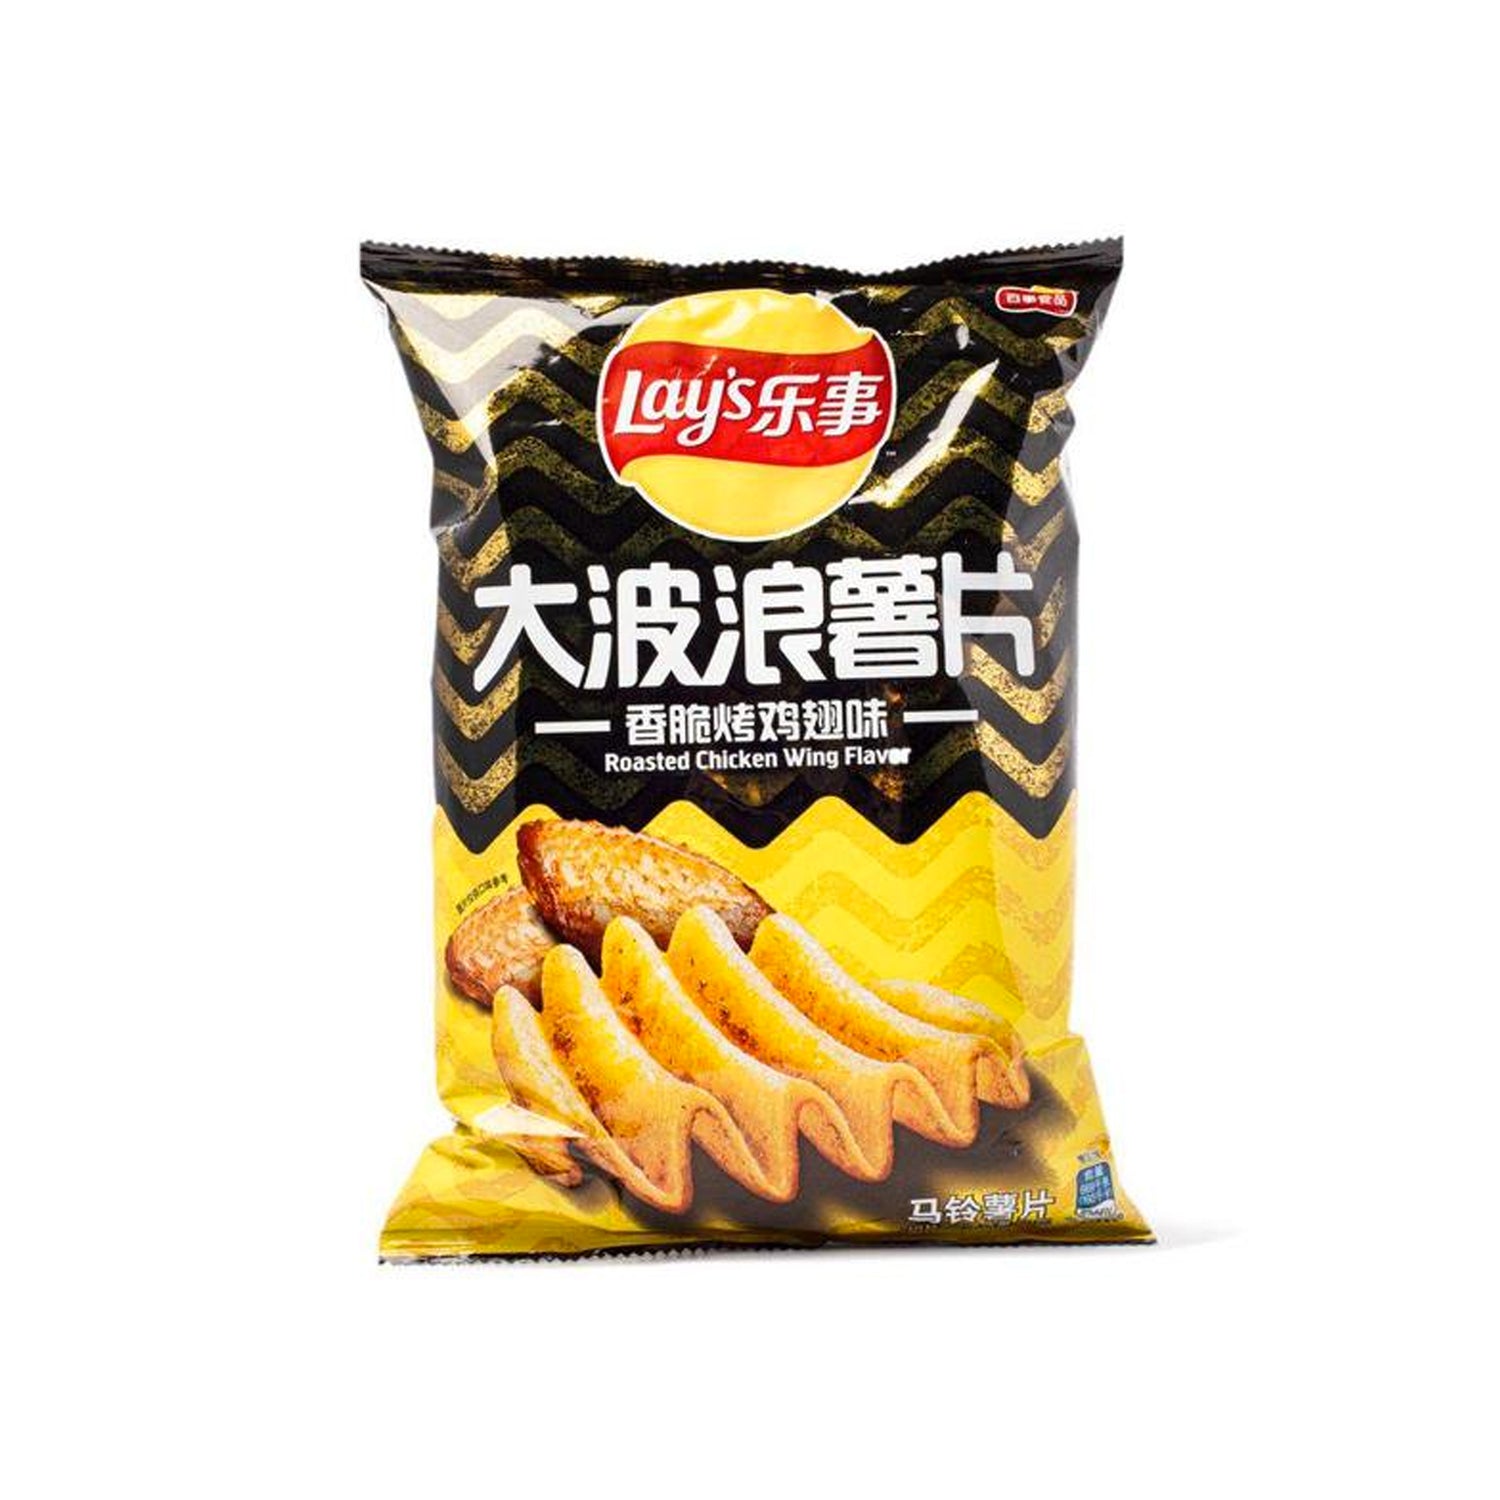 Exotic Lay's